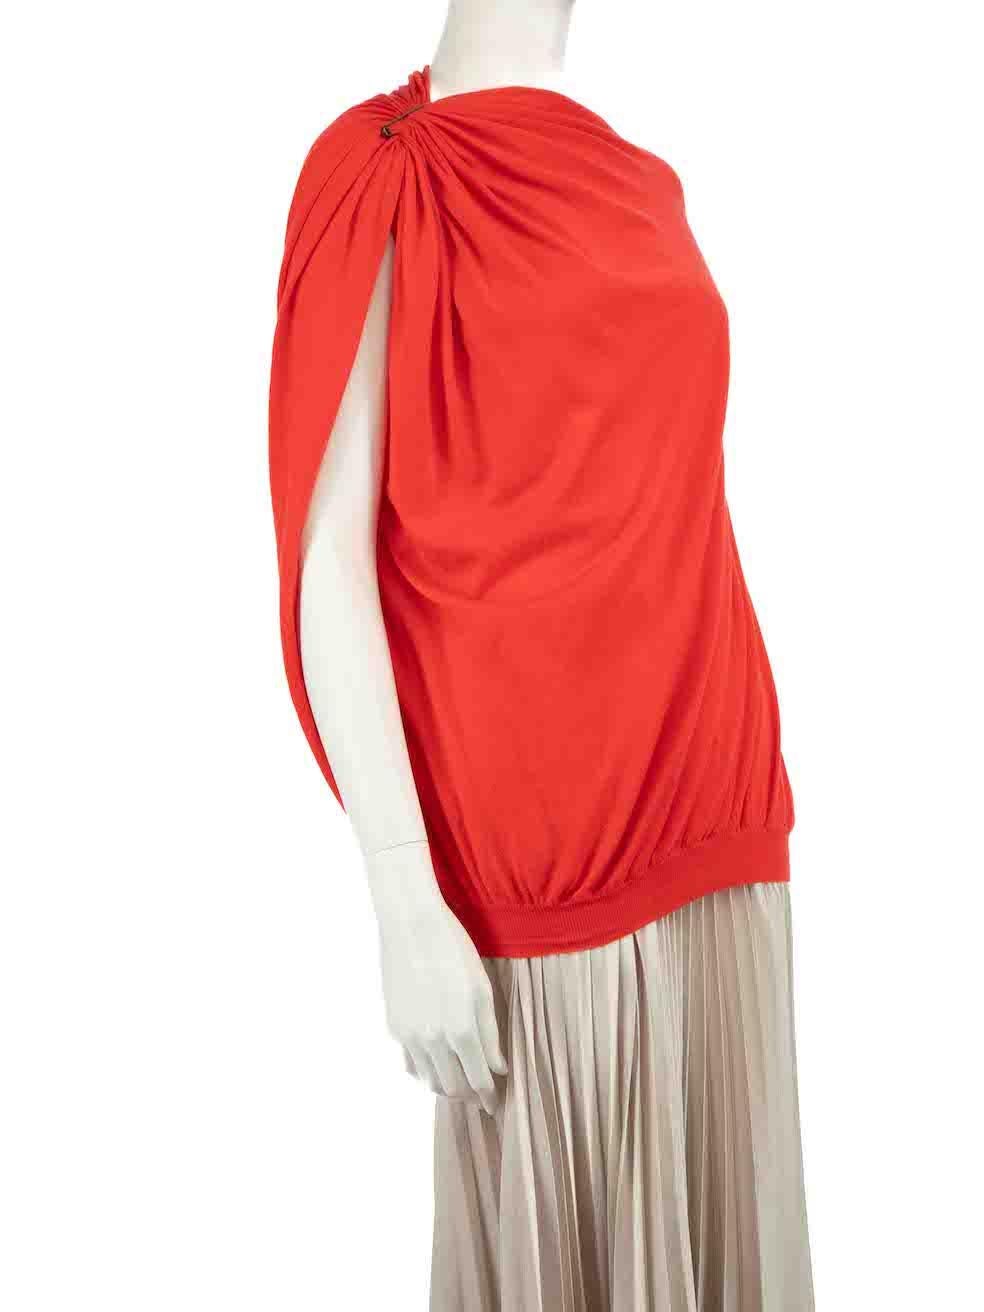 CONDITION is Very good. Minimal wear to top is evident. Minimal wear to the front with a small mark on this used Lanvin designer resale item.
 
 Details
 Red
 Cashmere
 Knit top
 Sleeveless
 Ruched drape shoulder detail
 Round neck
 
 
 Made in